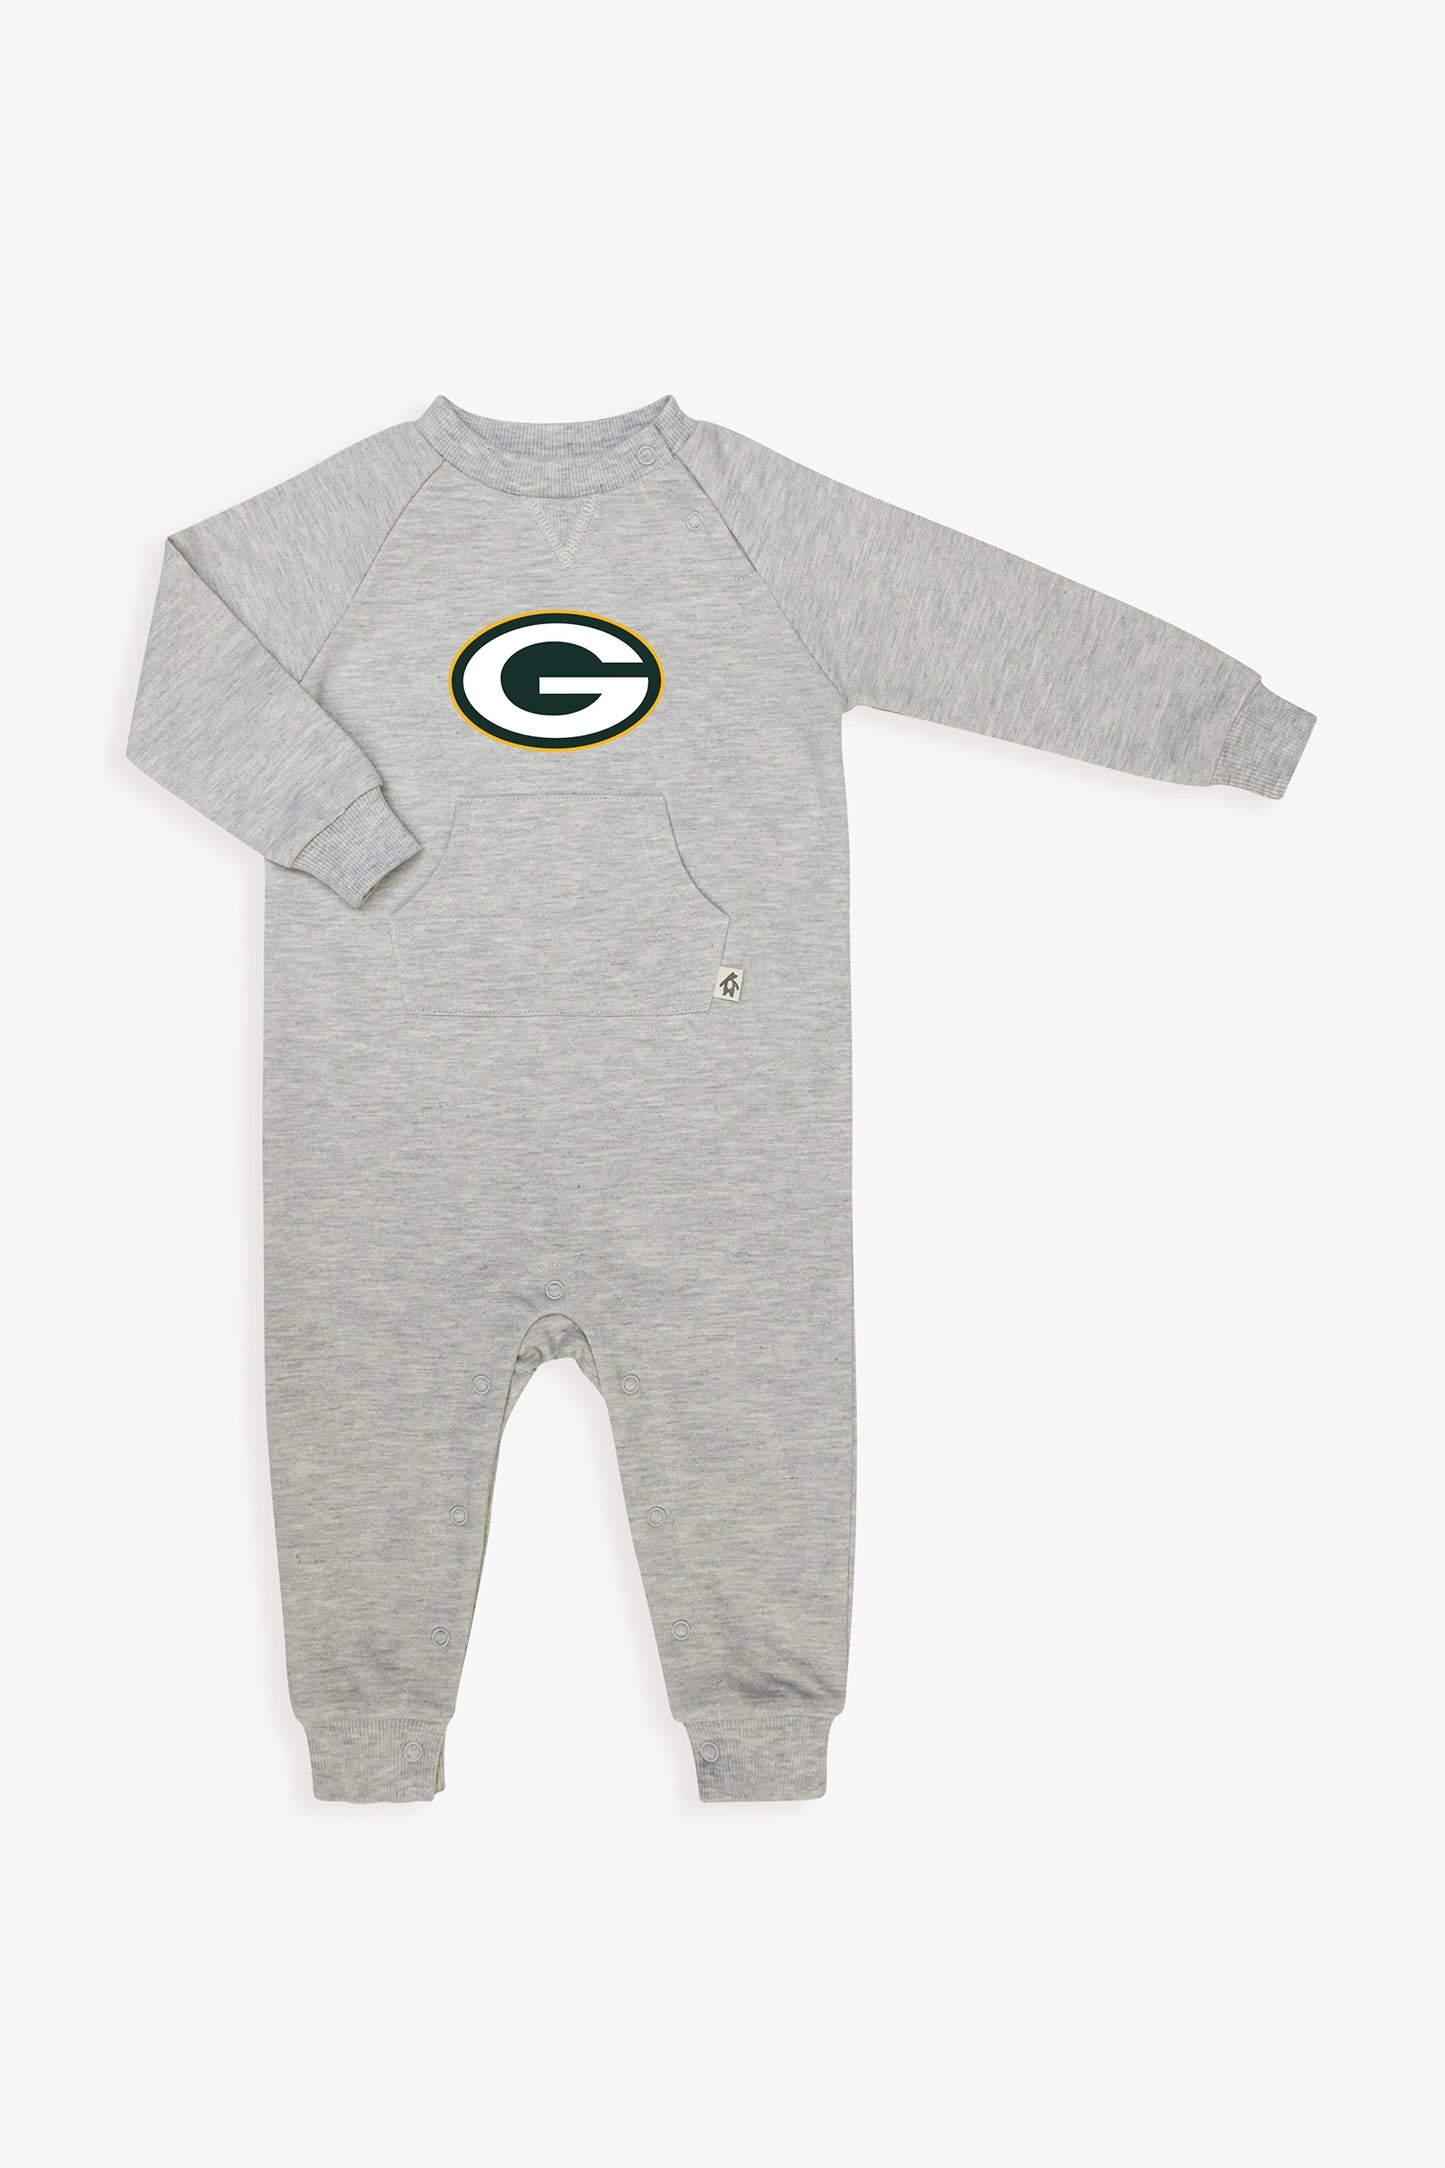 NFL Toddler French Terry Jumpsuit in Grey